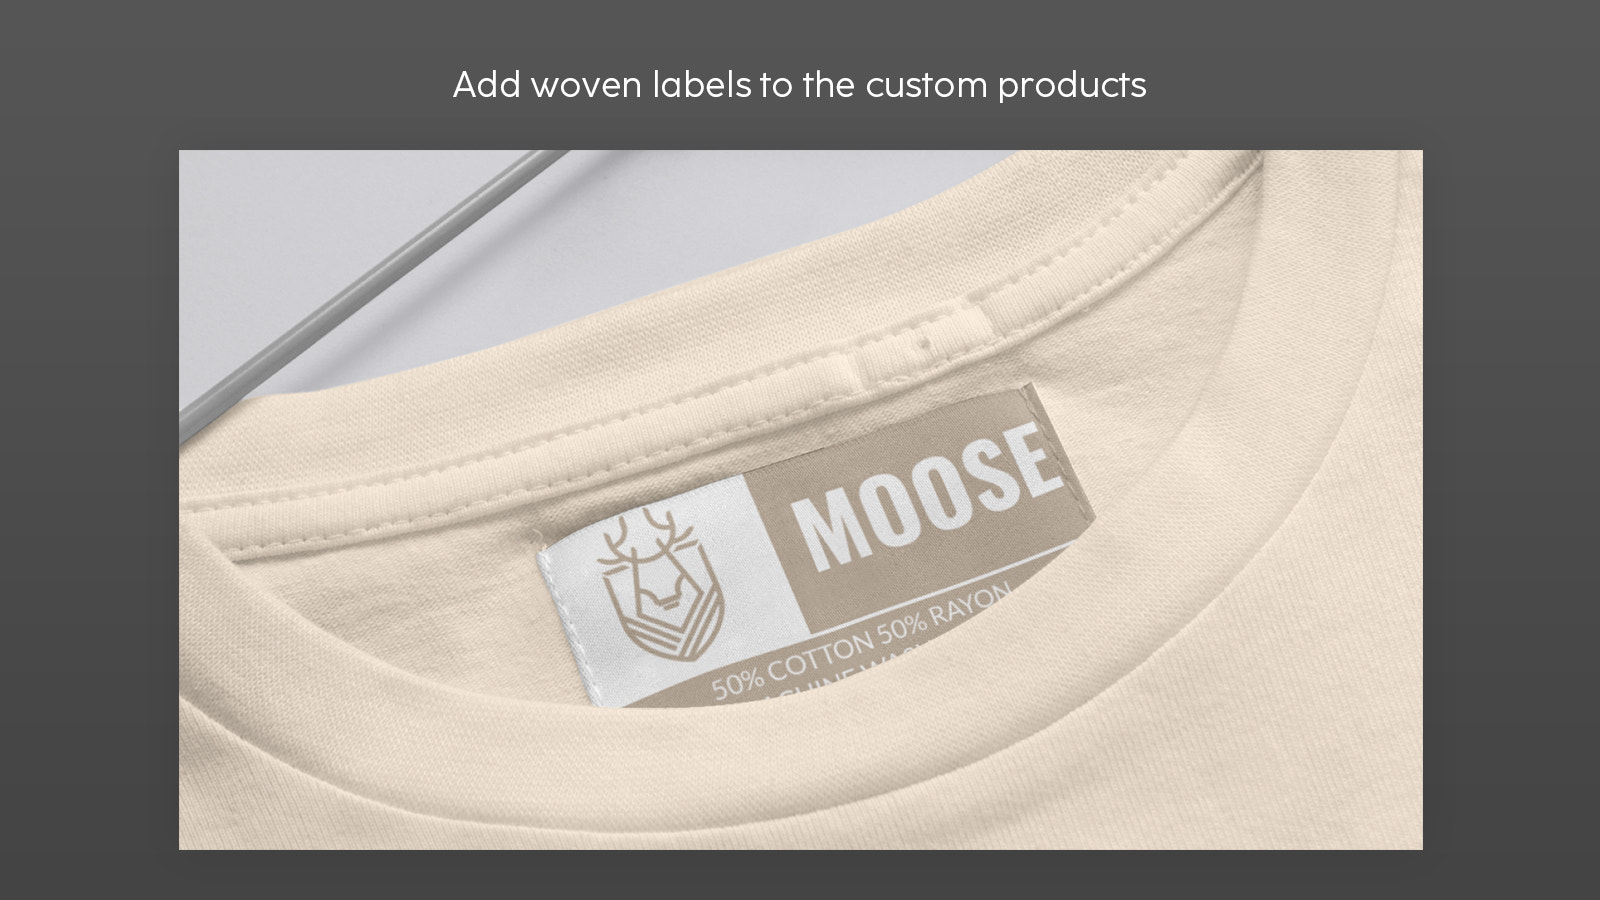 Add woven labels to the custom products